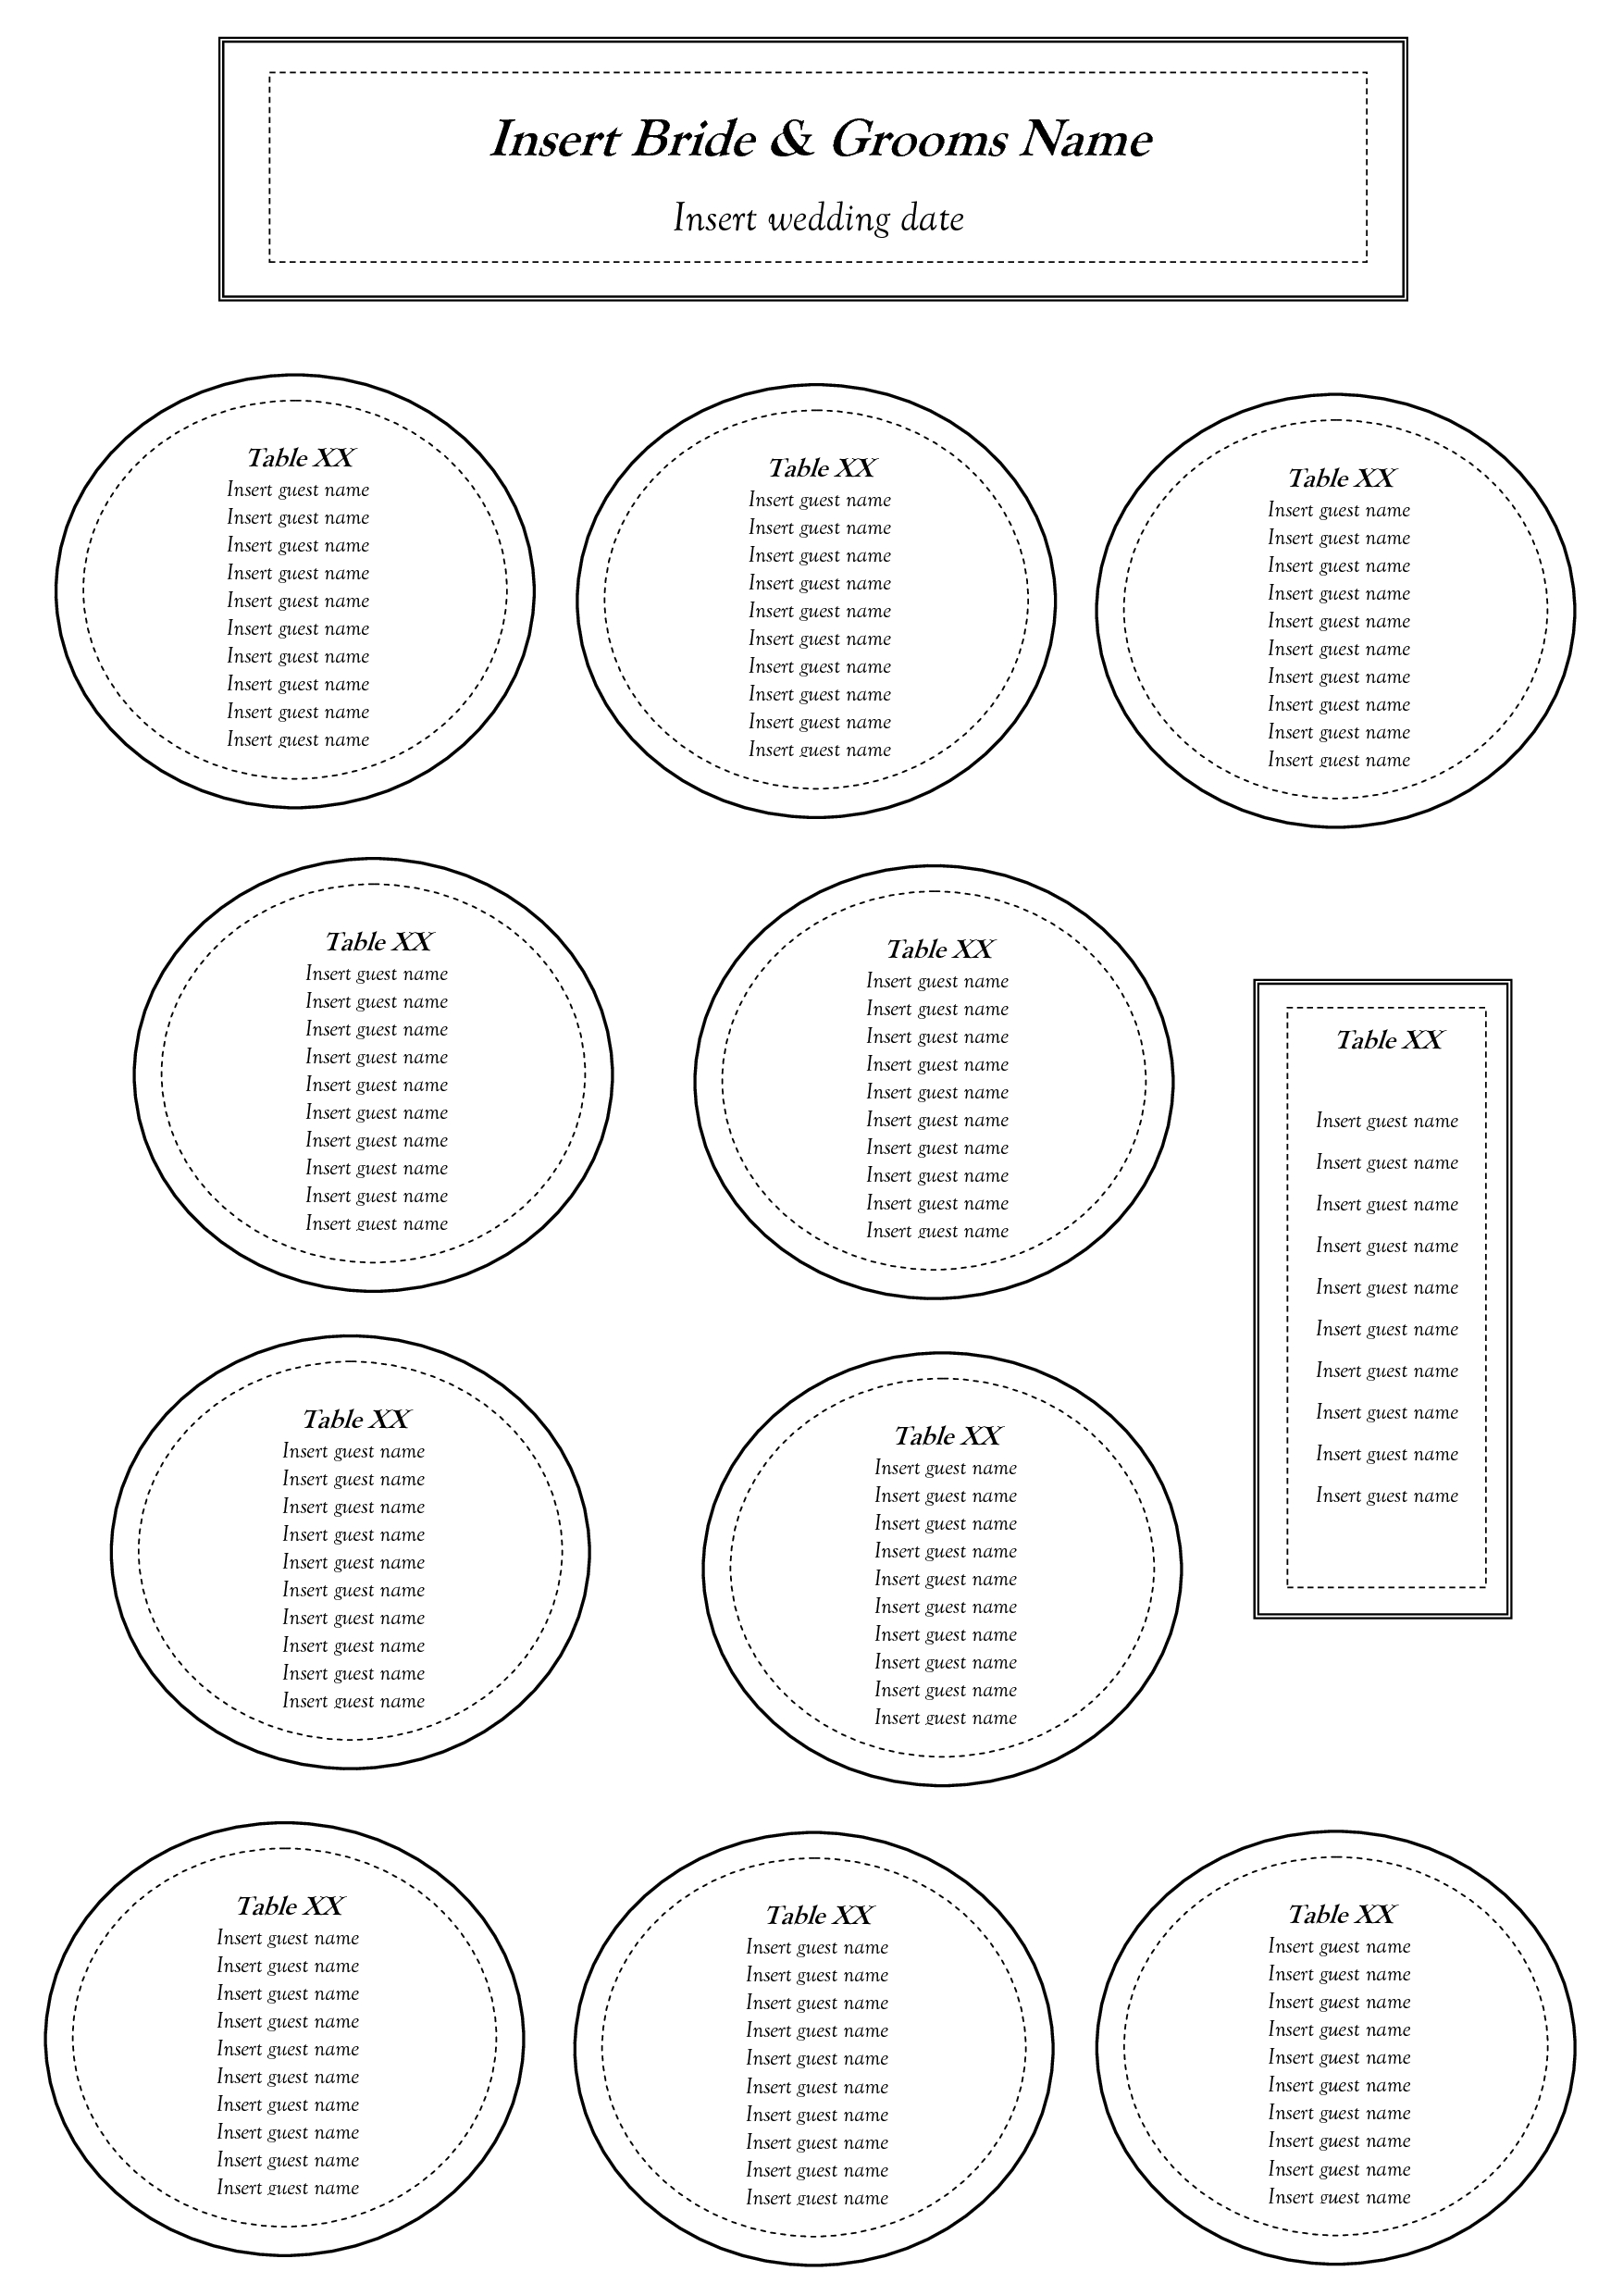 Free Table Seating Chart Template | Seating Charts In 2019 | Seating - Free Printable Wedding Seating Plan